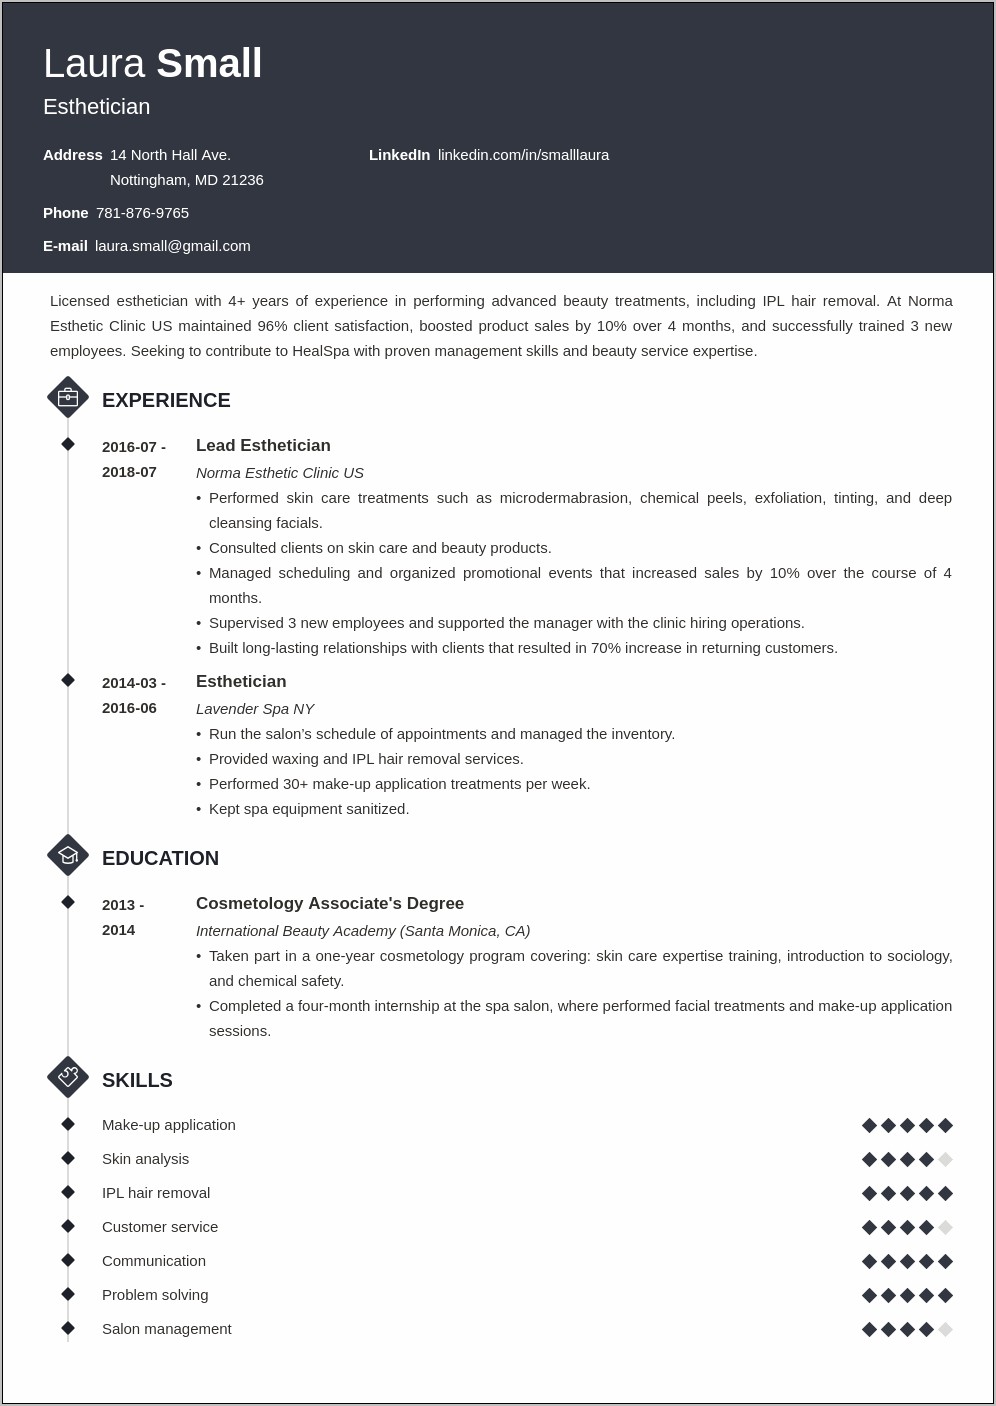 Resume Template Kelly School Of Business